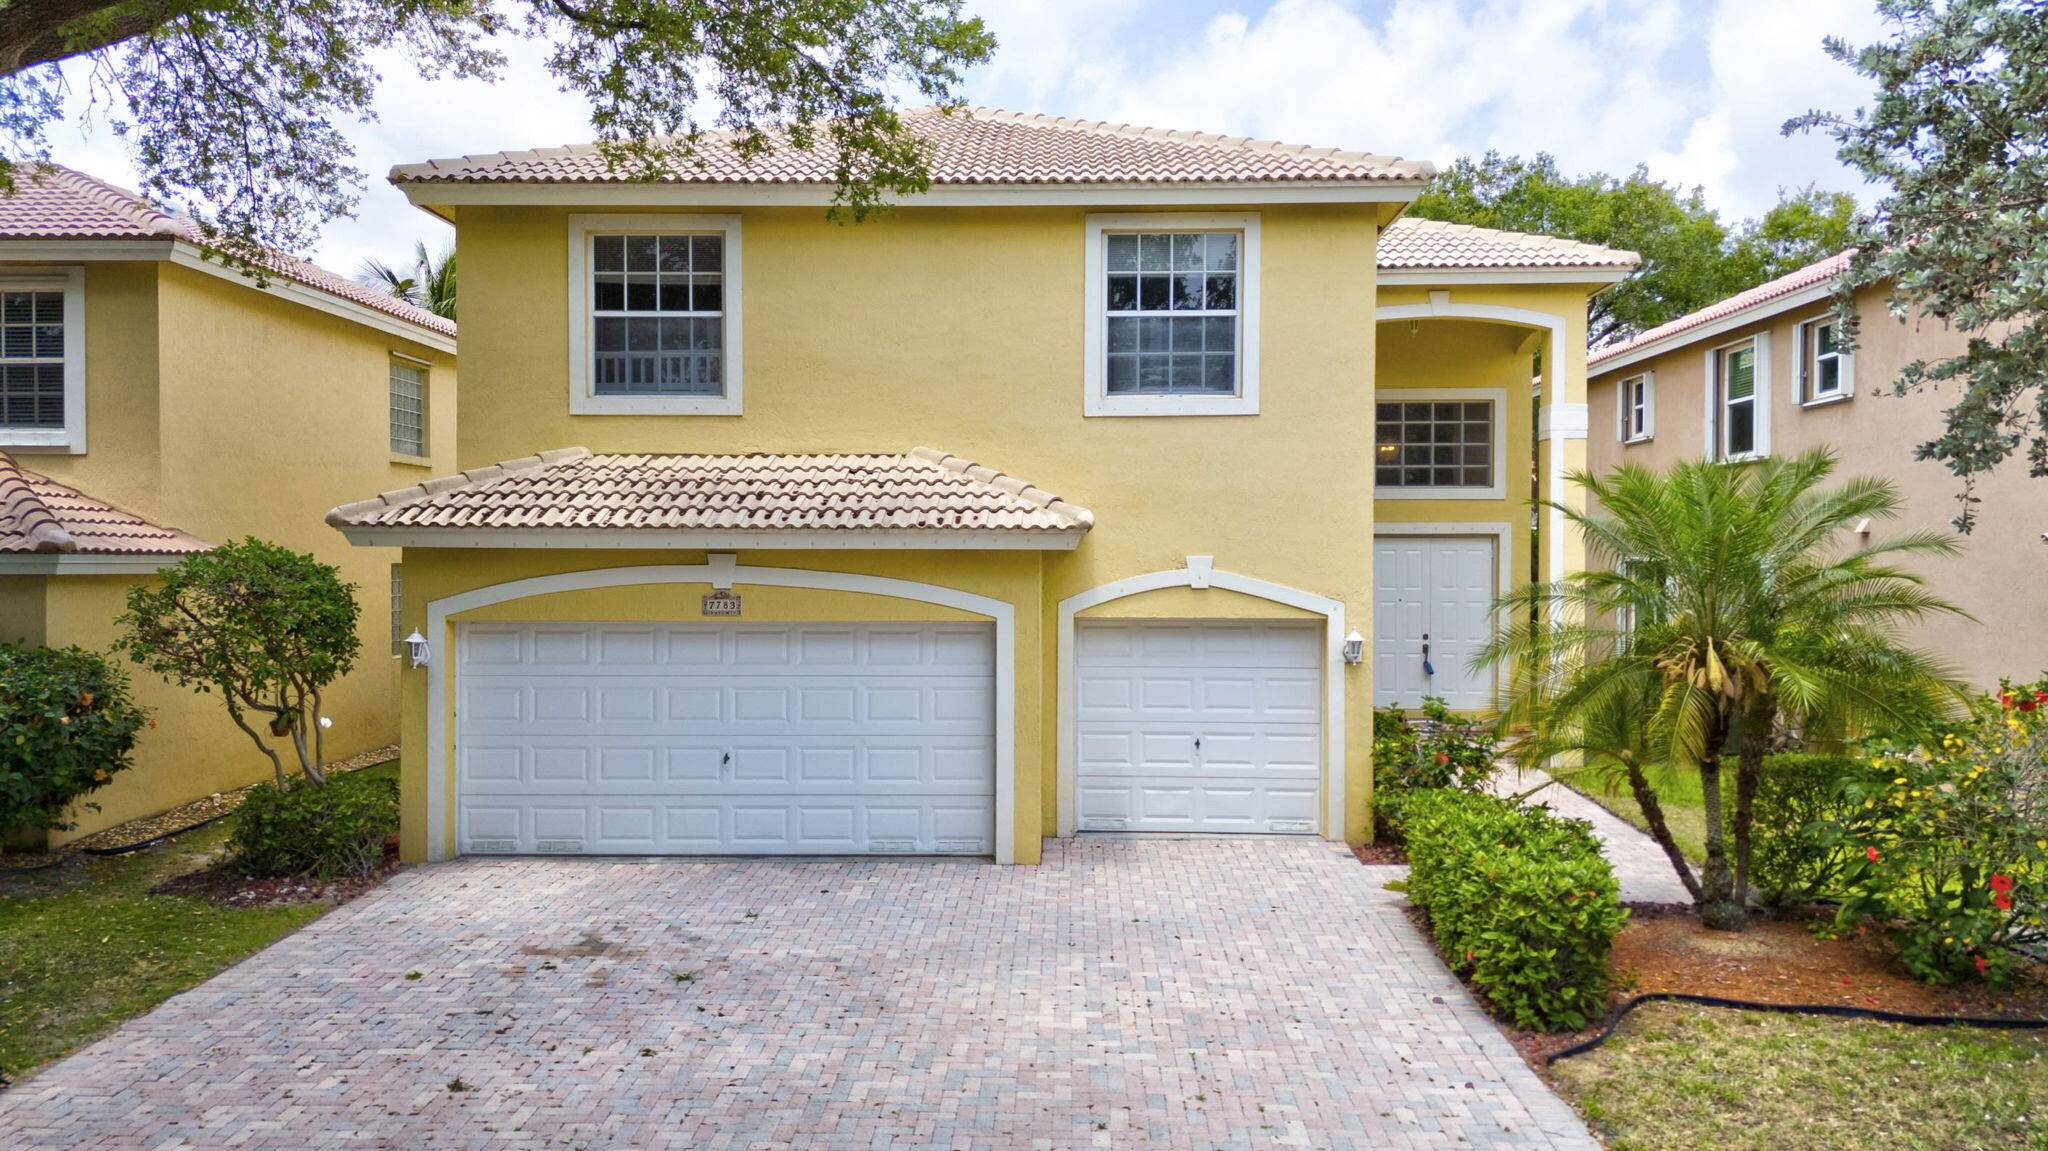 Rarely Available 5 Bedroom, 2 1 2 Bathroom Home in the Gated Community of The Lakes At Parkland.